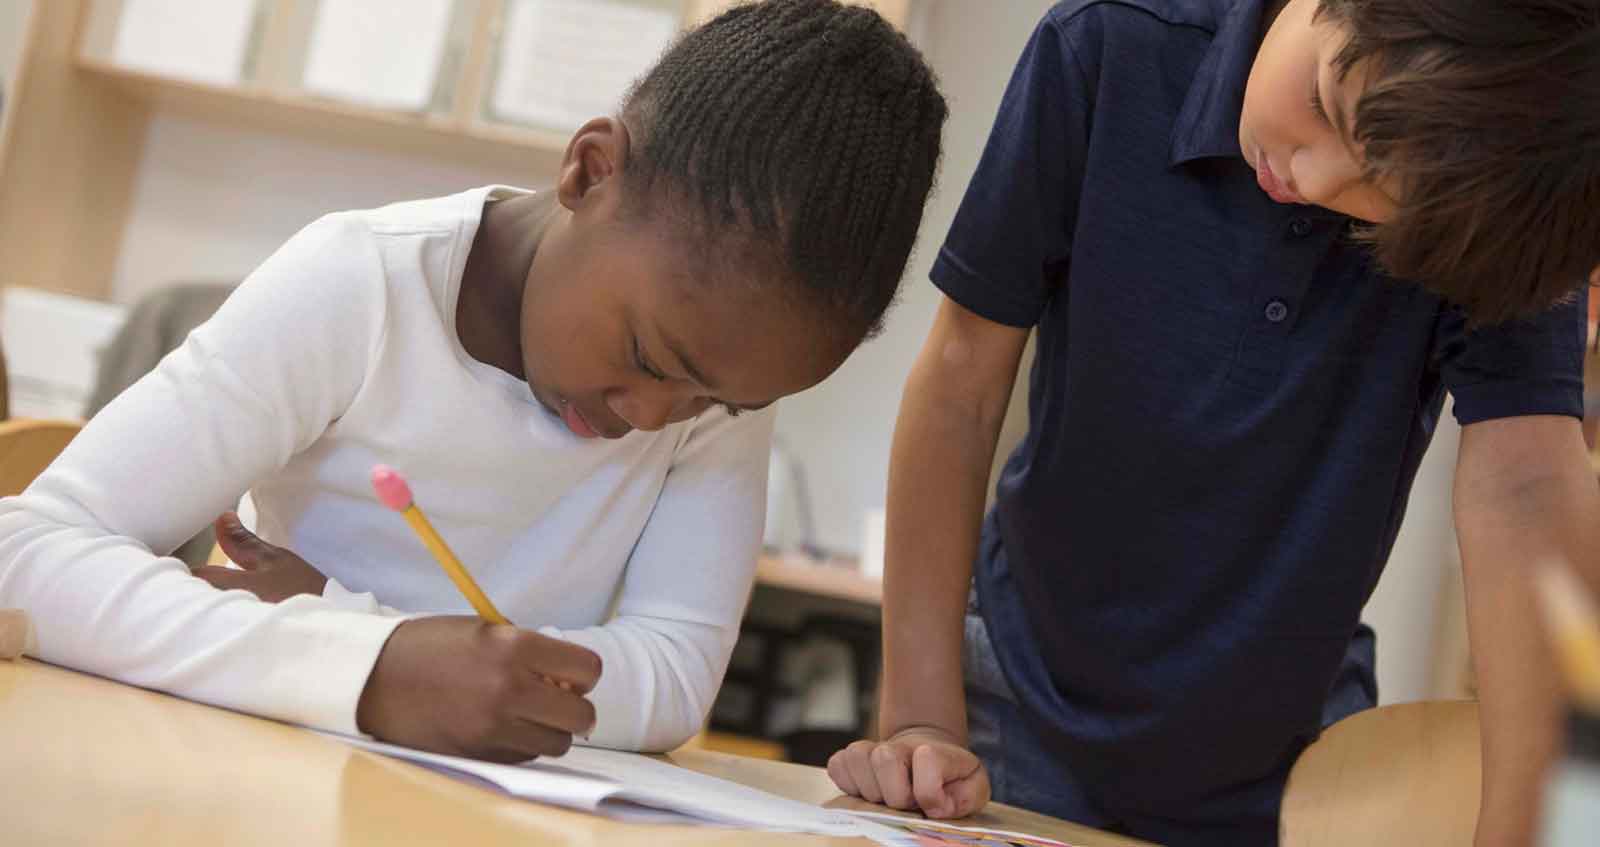 A little girl is using a pencil and paper to complete a school task